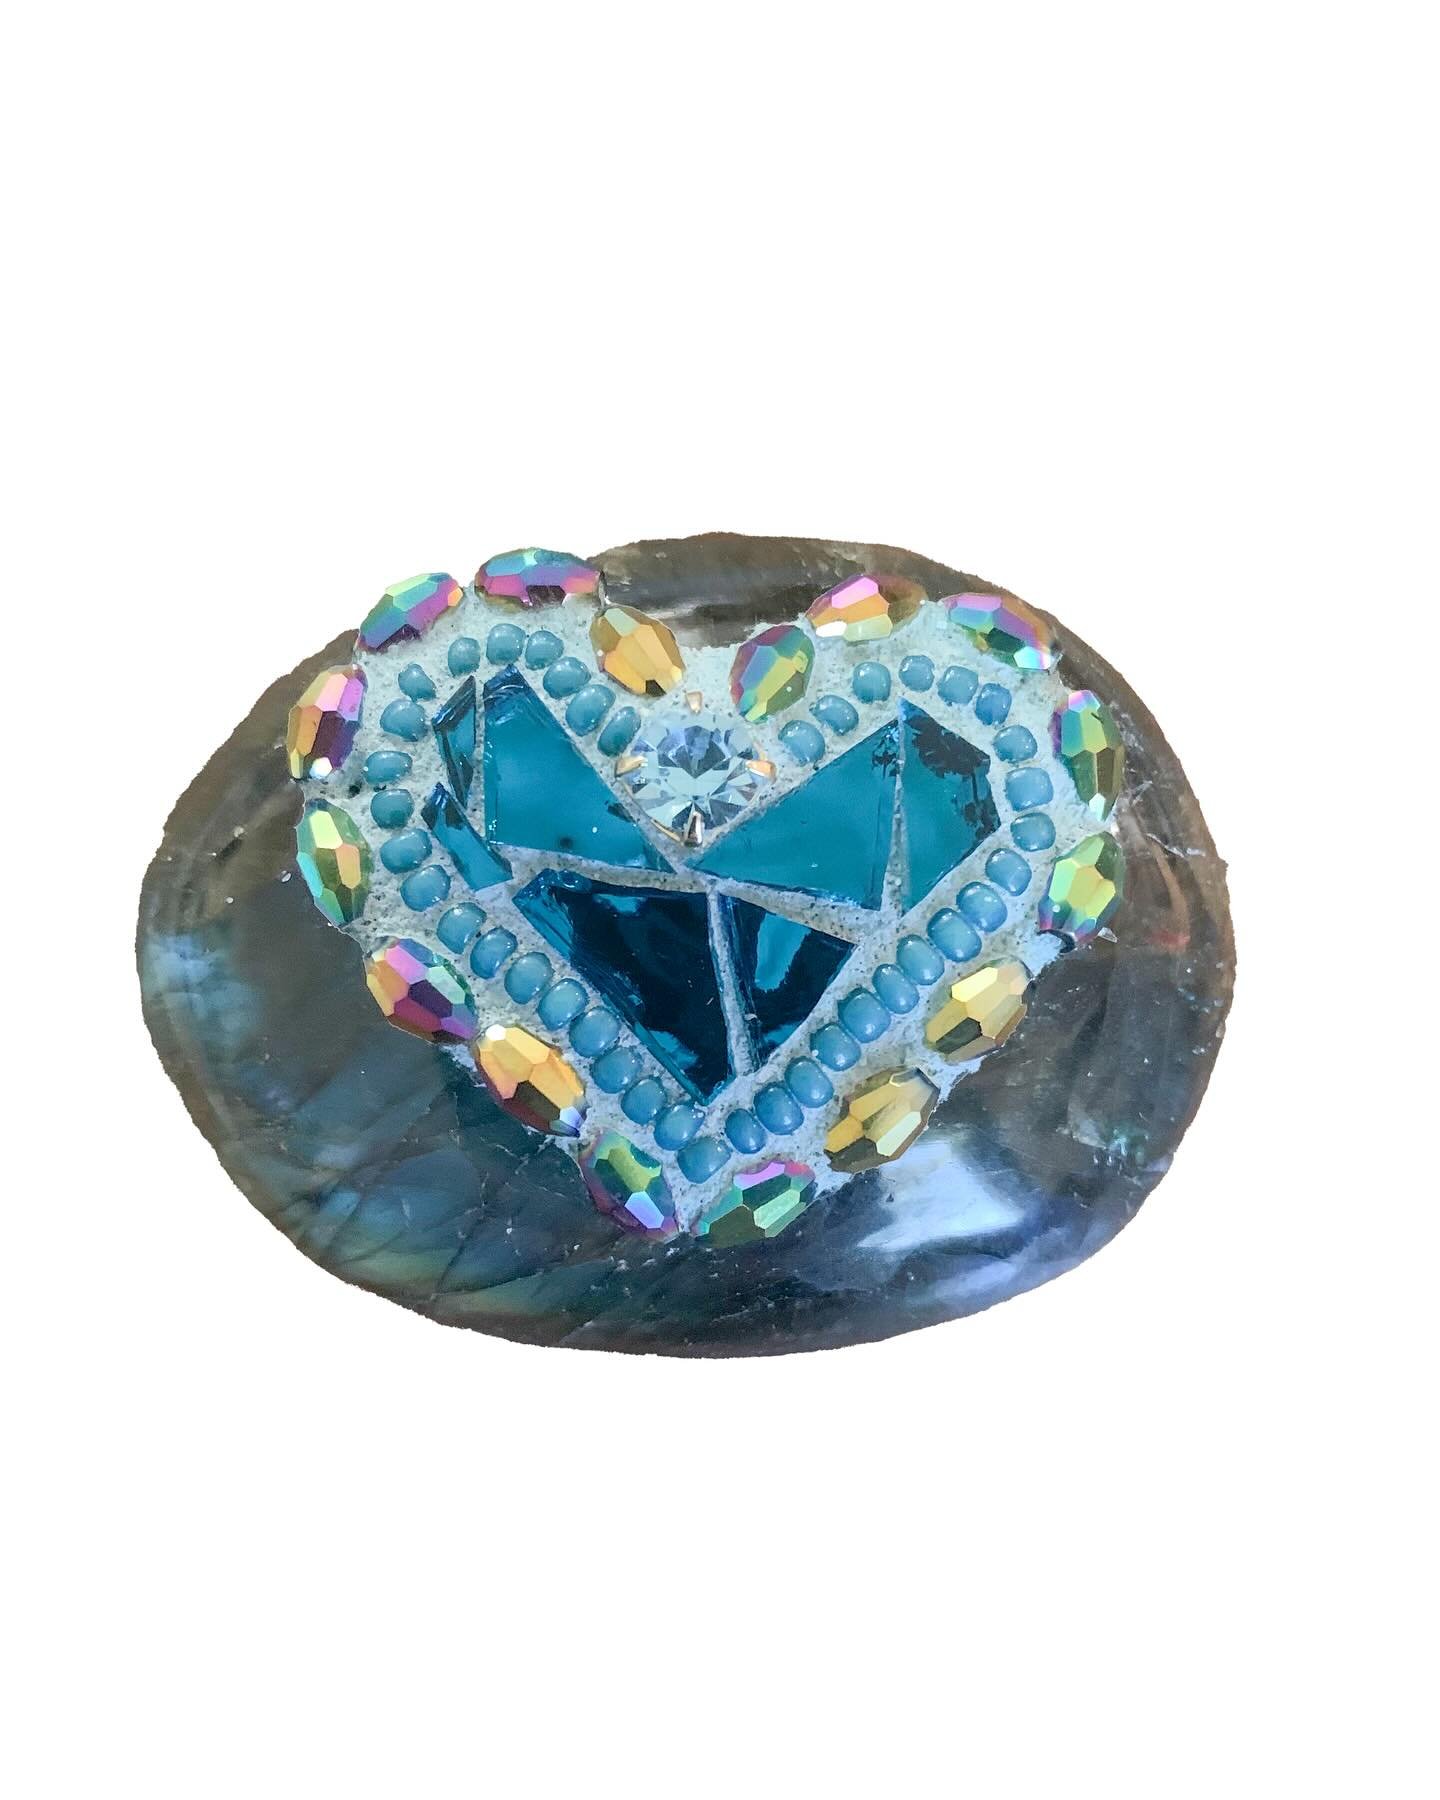 Labradorite palm stone with mosaic heart for transformation, strengthens intuition, faith in oneself #meditation #mindfulness #labradorite #labradoritepalmstone